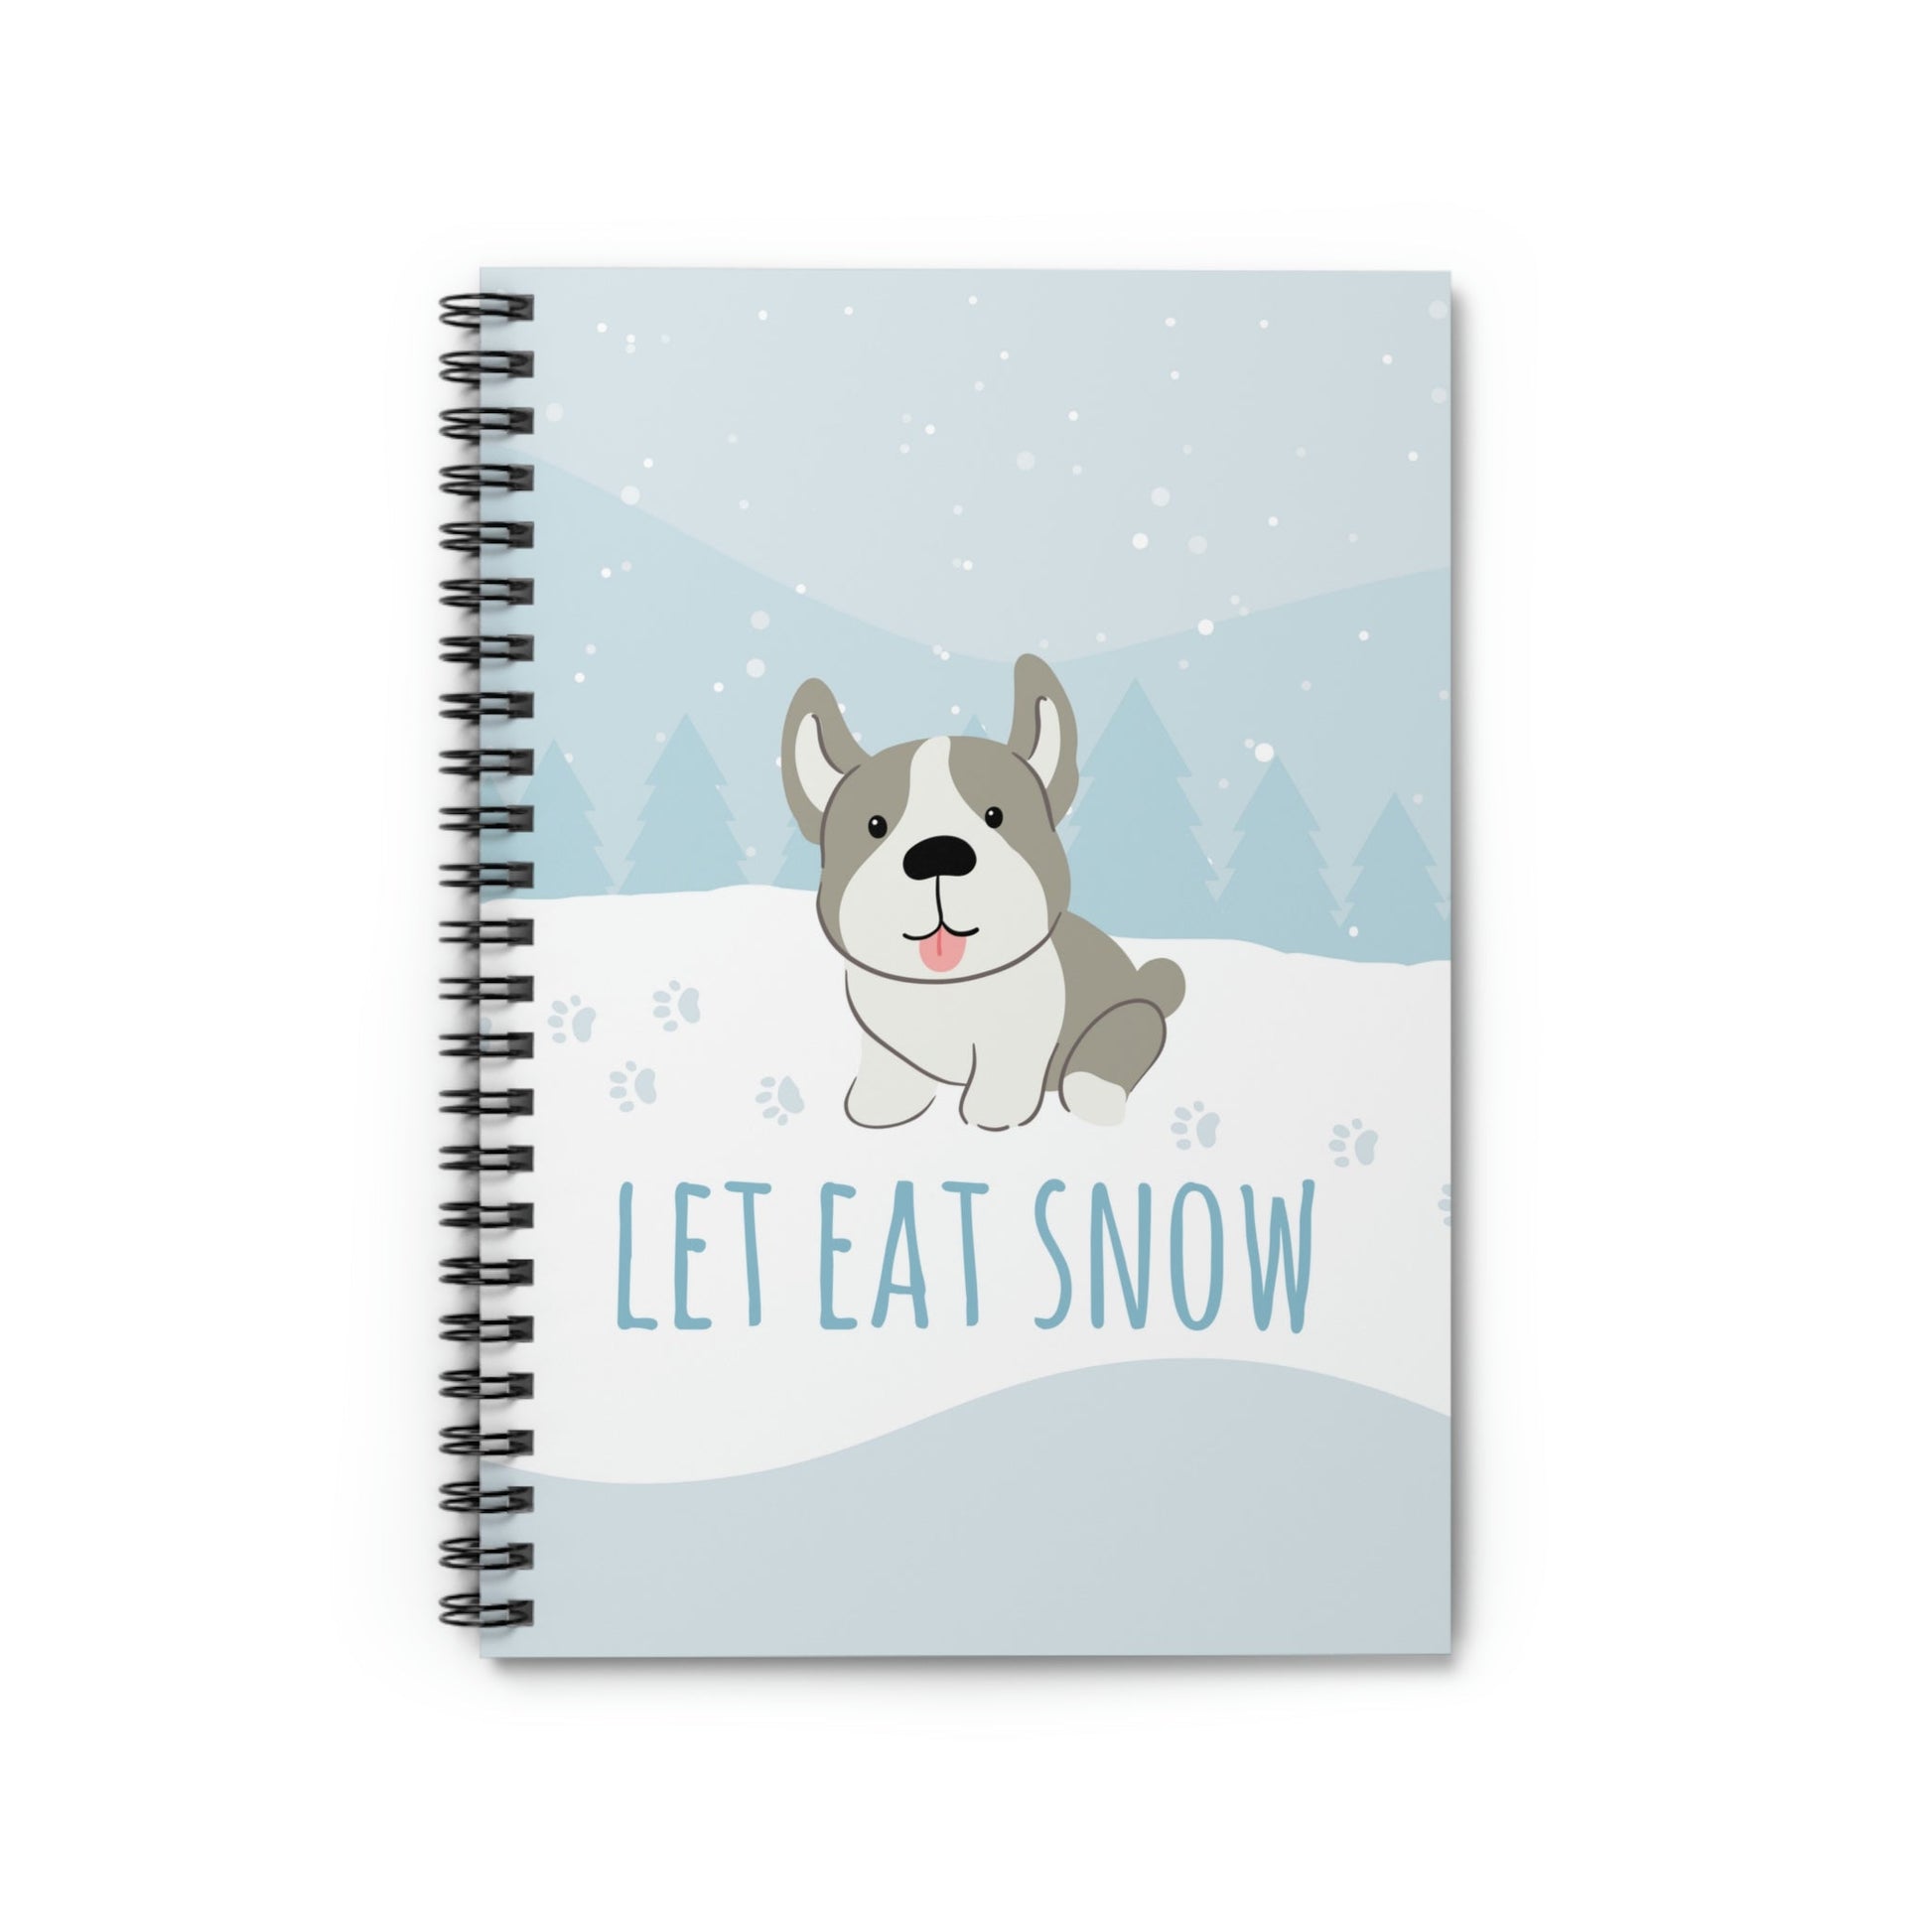 Let Eat Snow Cute Dog Anime Snow Spiral Notebook Ruled Line Ichaku [Perfect Gifts Selection]